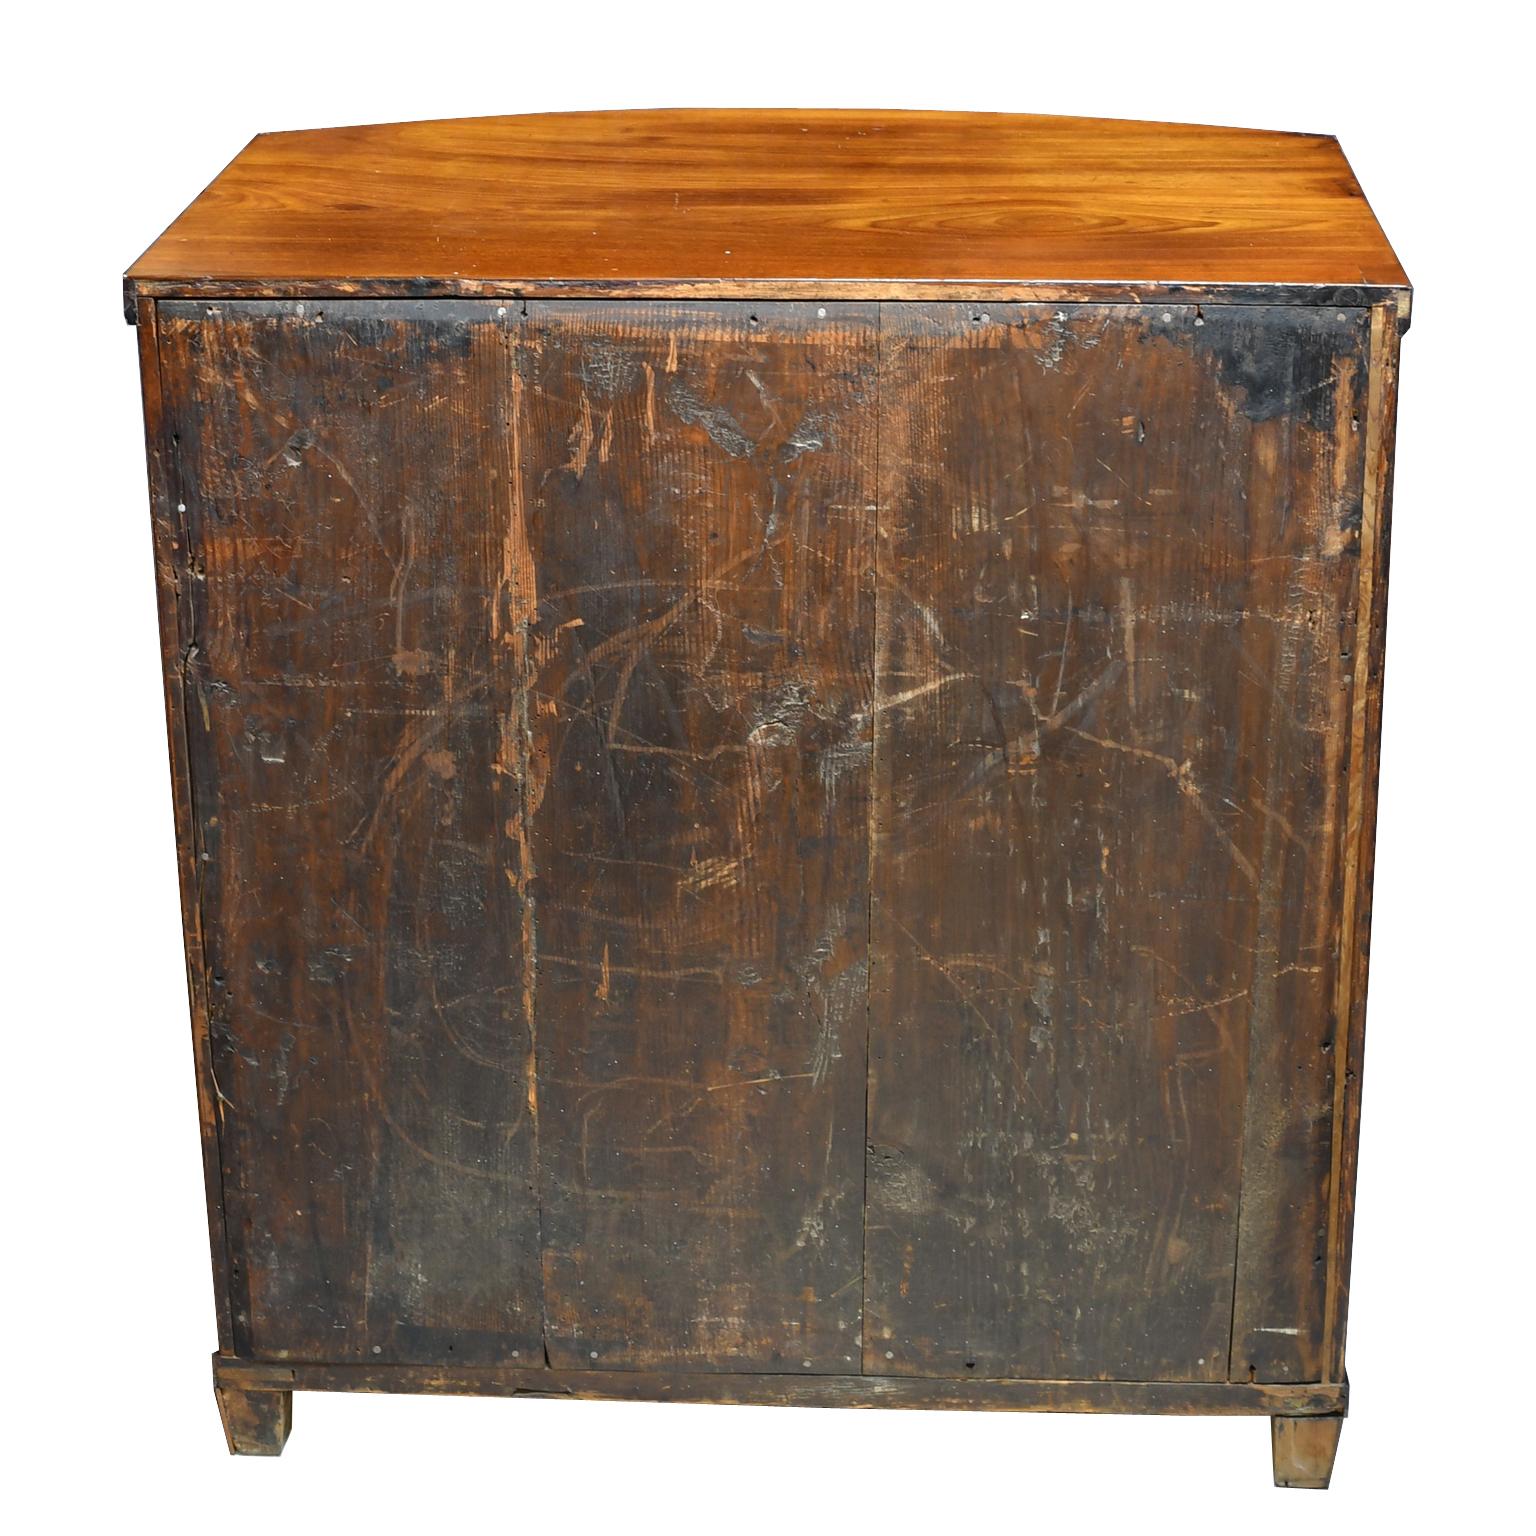 Small Antique Empire Chest of Drawers/Nightstand in West Indies Mahogany, c 1810 3